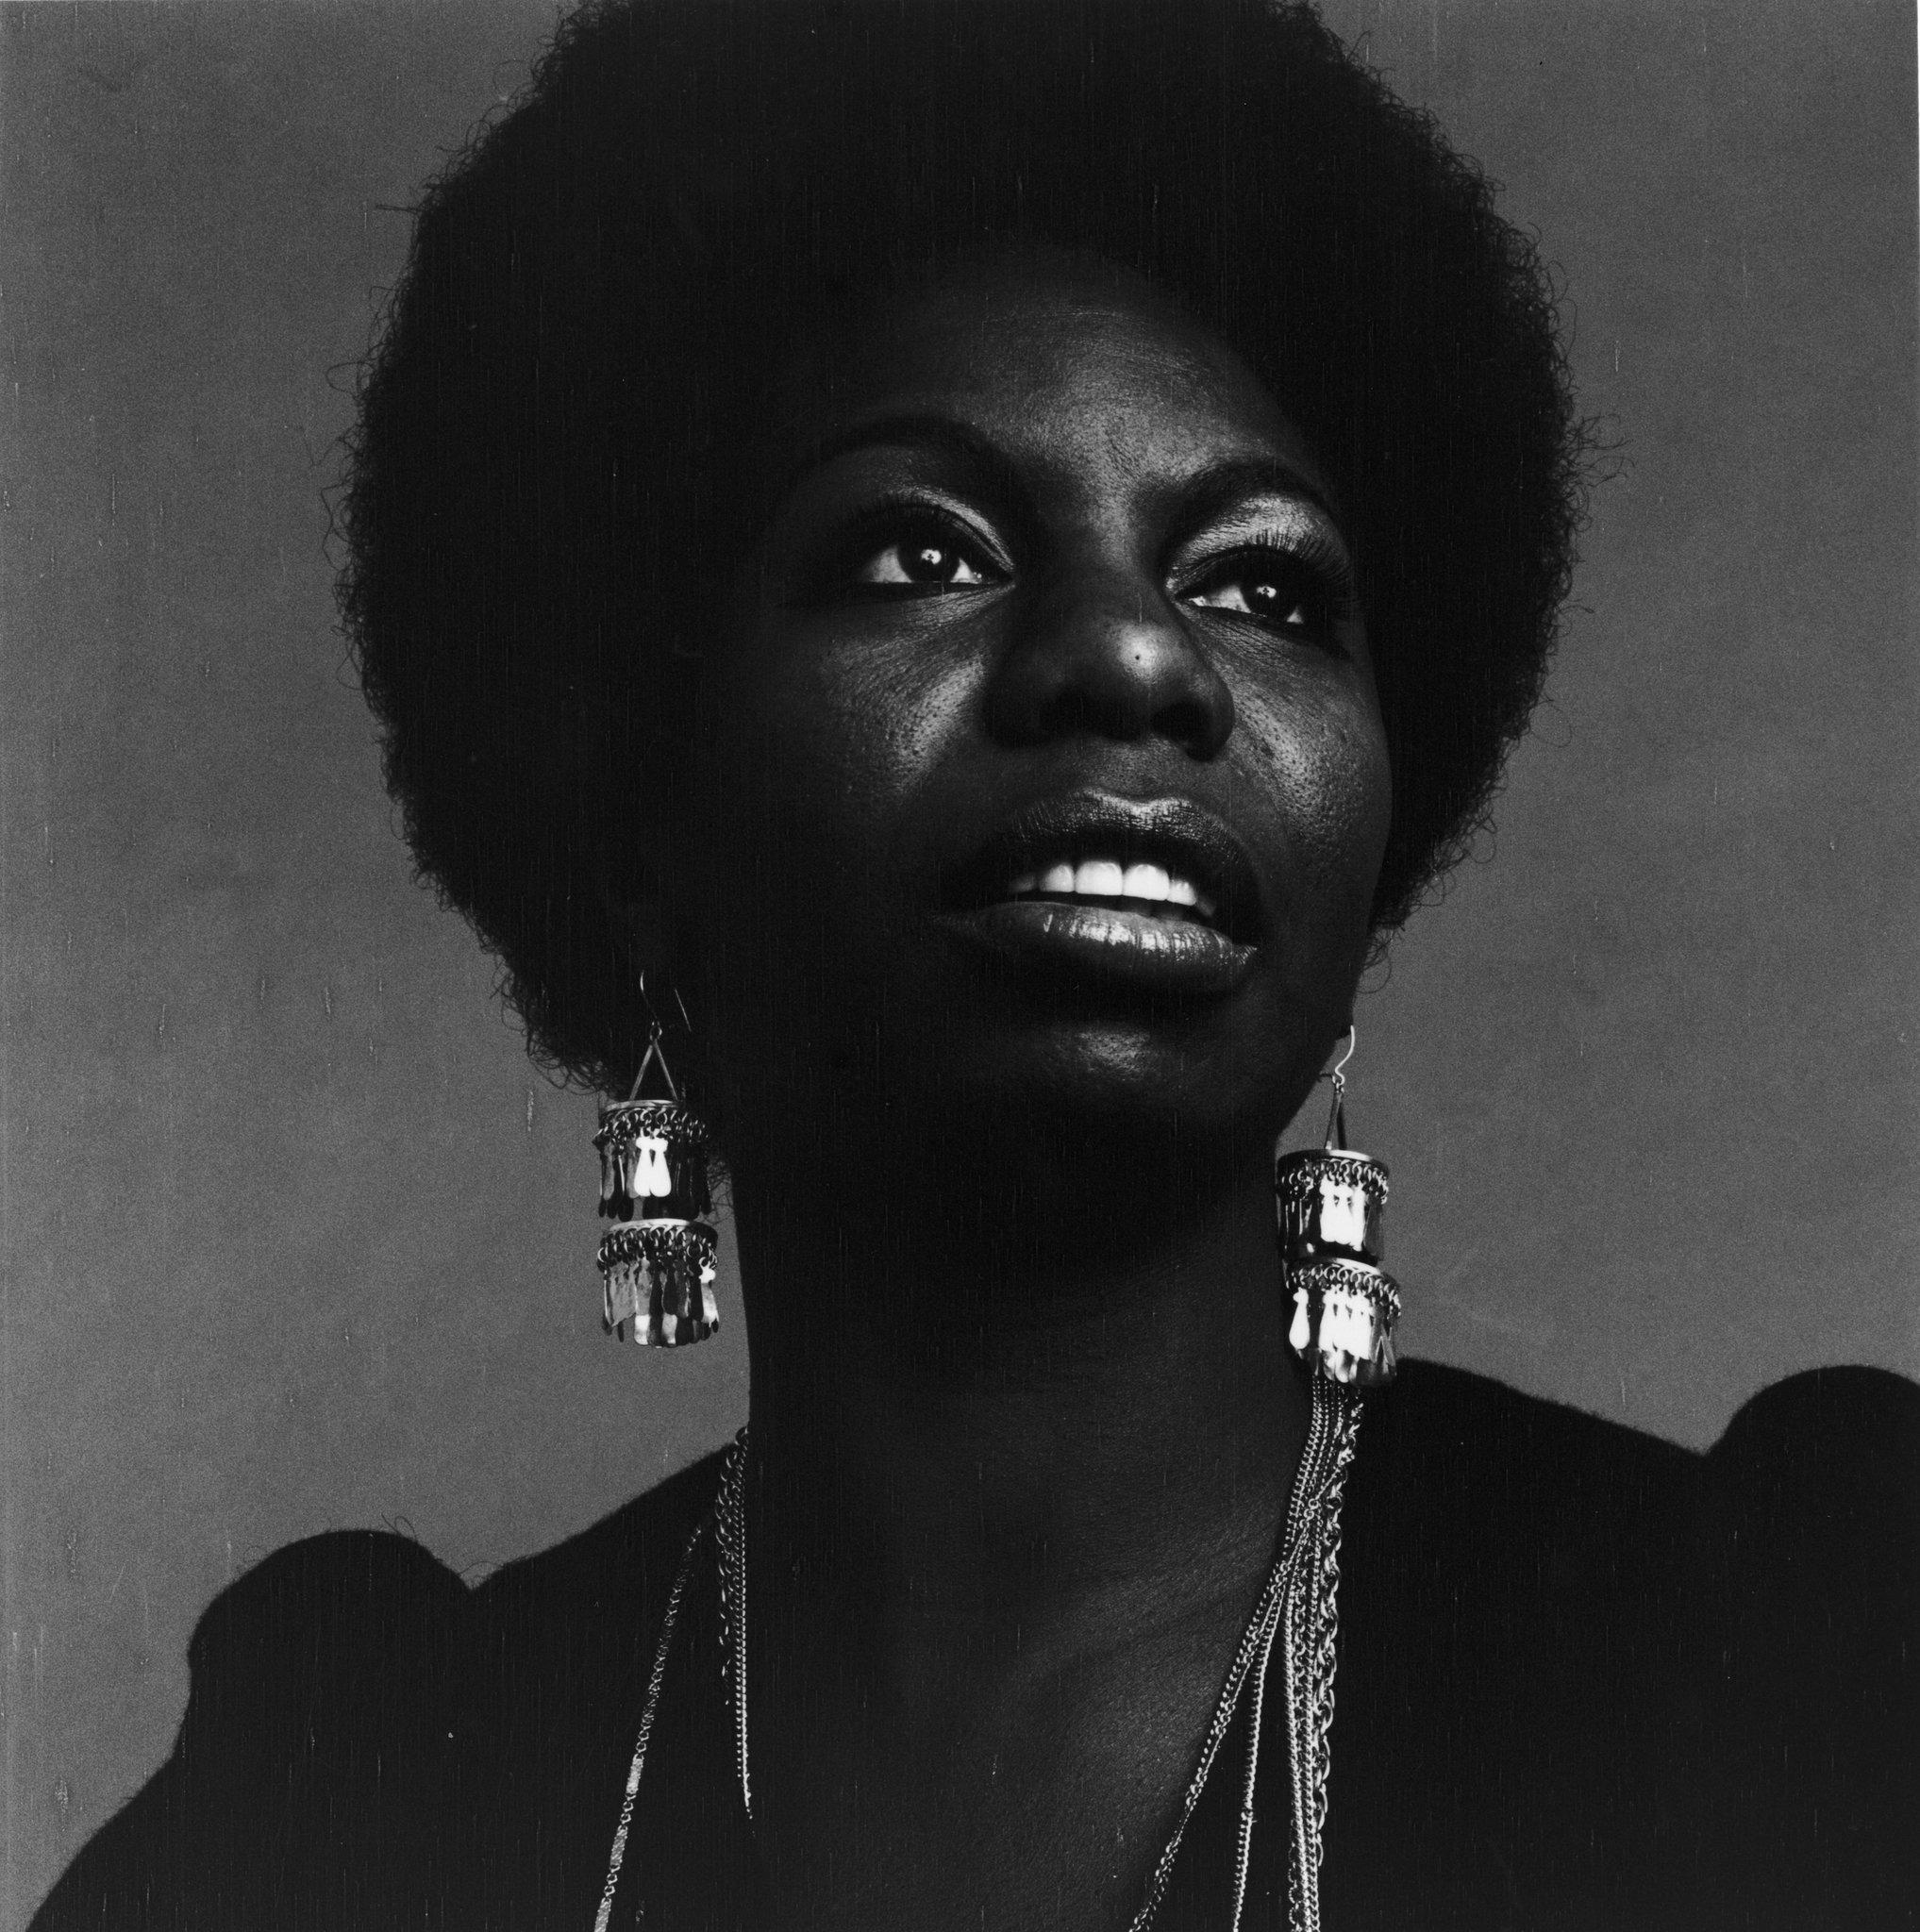 Happy Birthday to Nina Simone, who would have turned 82 today! 